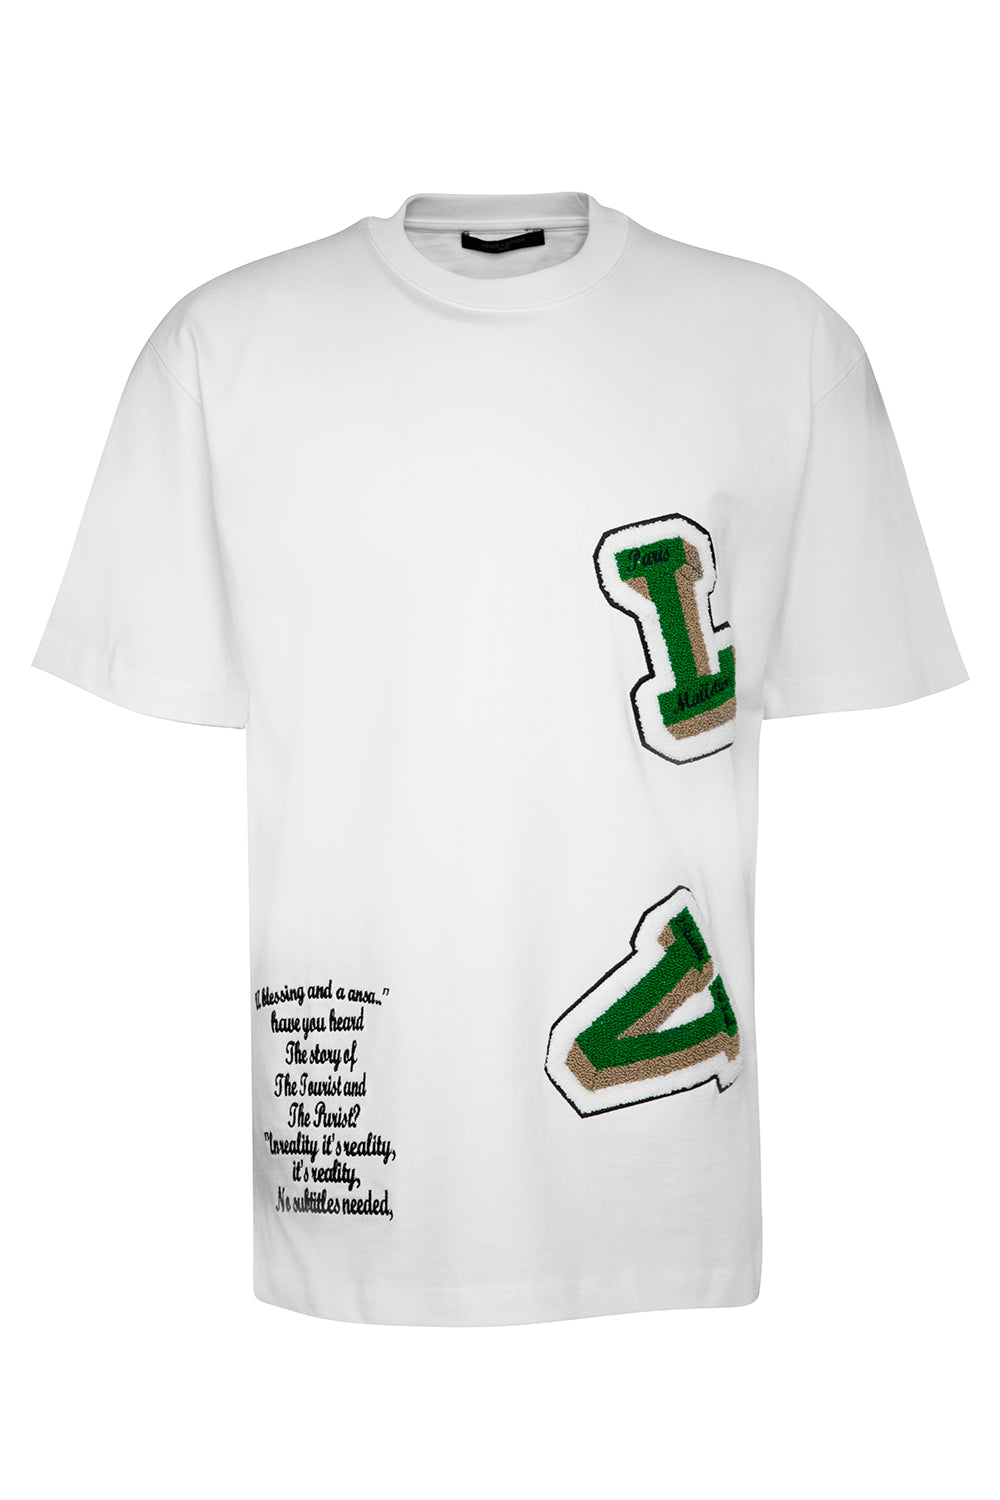 LOUIS VUITTON LV EMBROIDERED GRAPHIC WHITE T-SHIRT